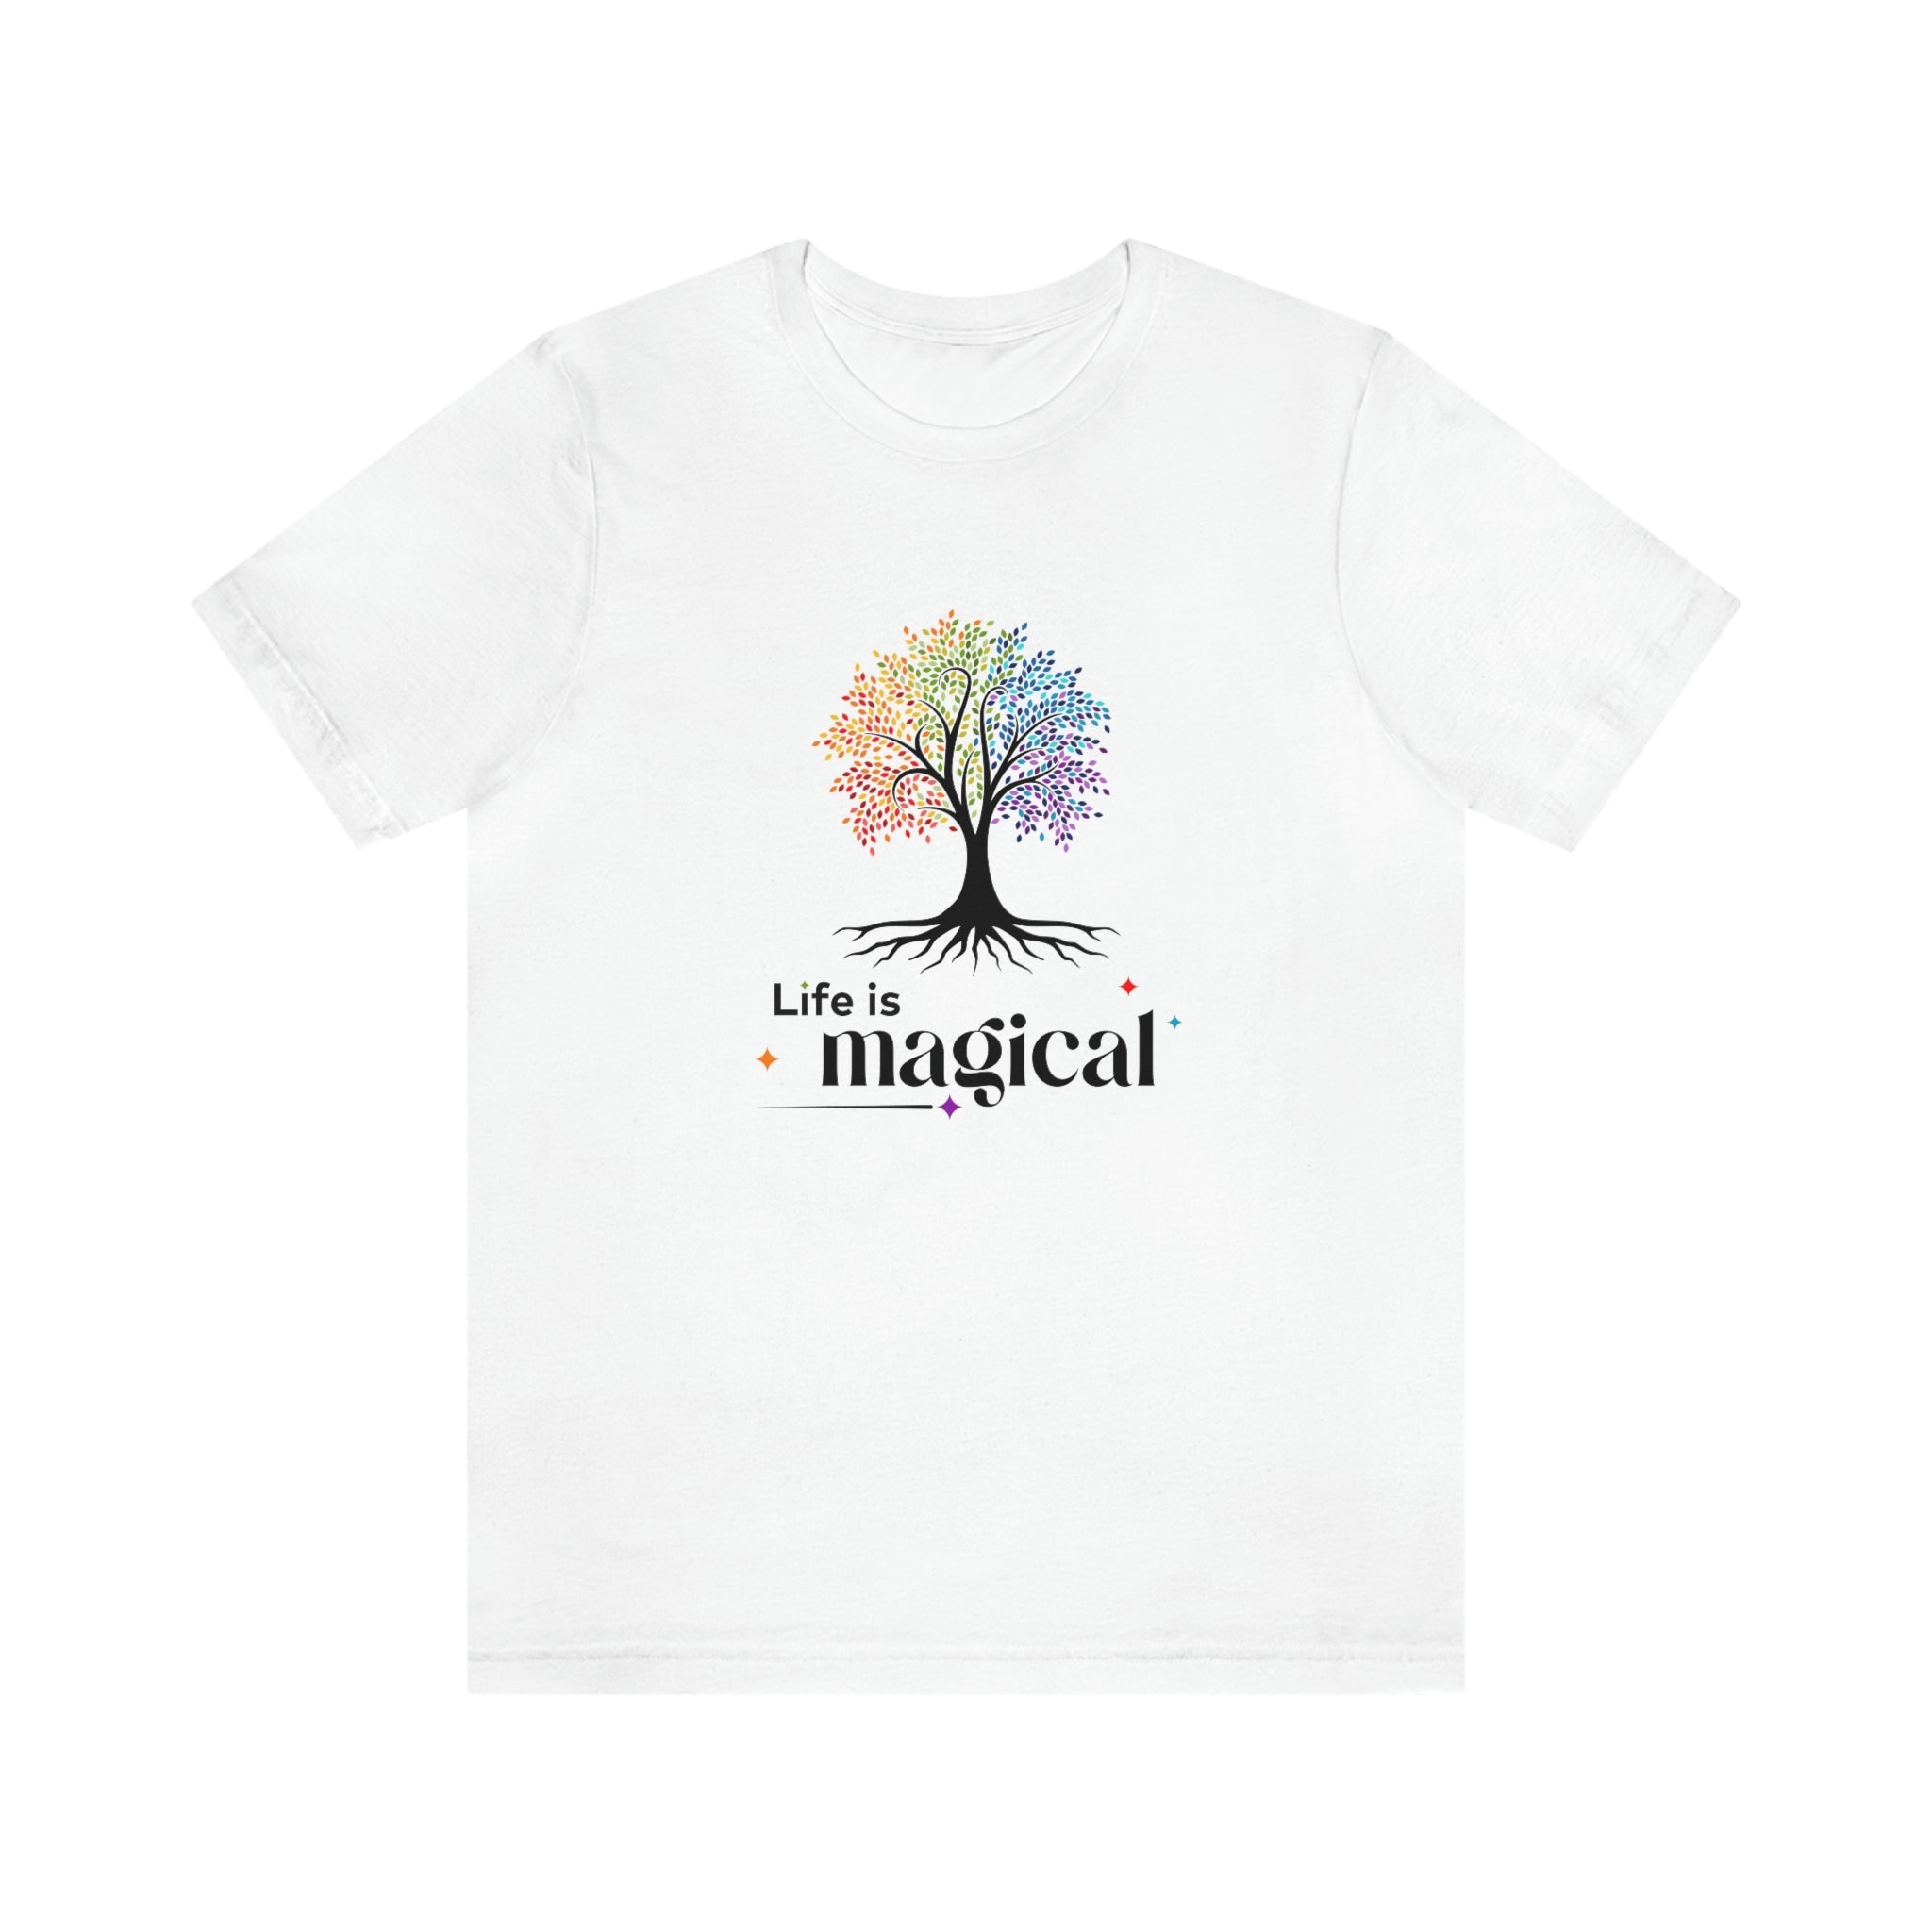 Life is Magical - The Tree of Life : Unisex 100% Premium Cotton T-Shirt by Bella+Canvas